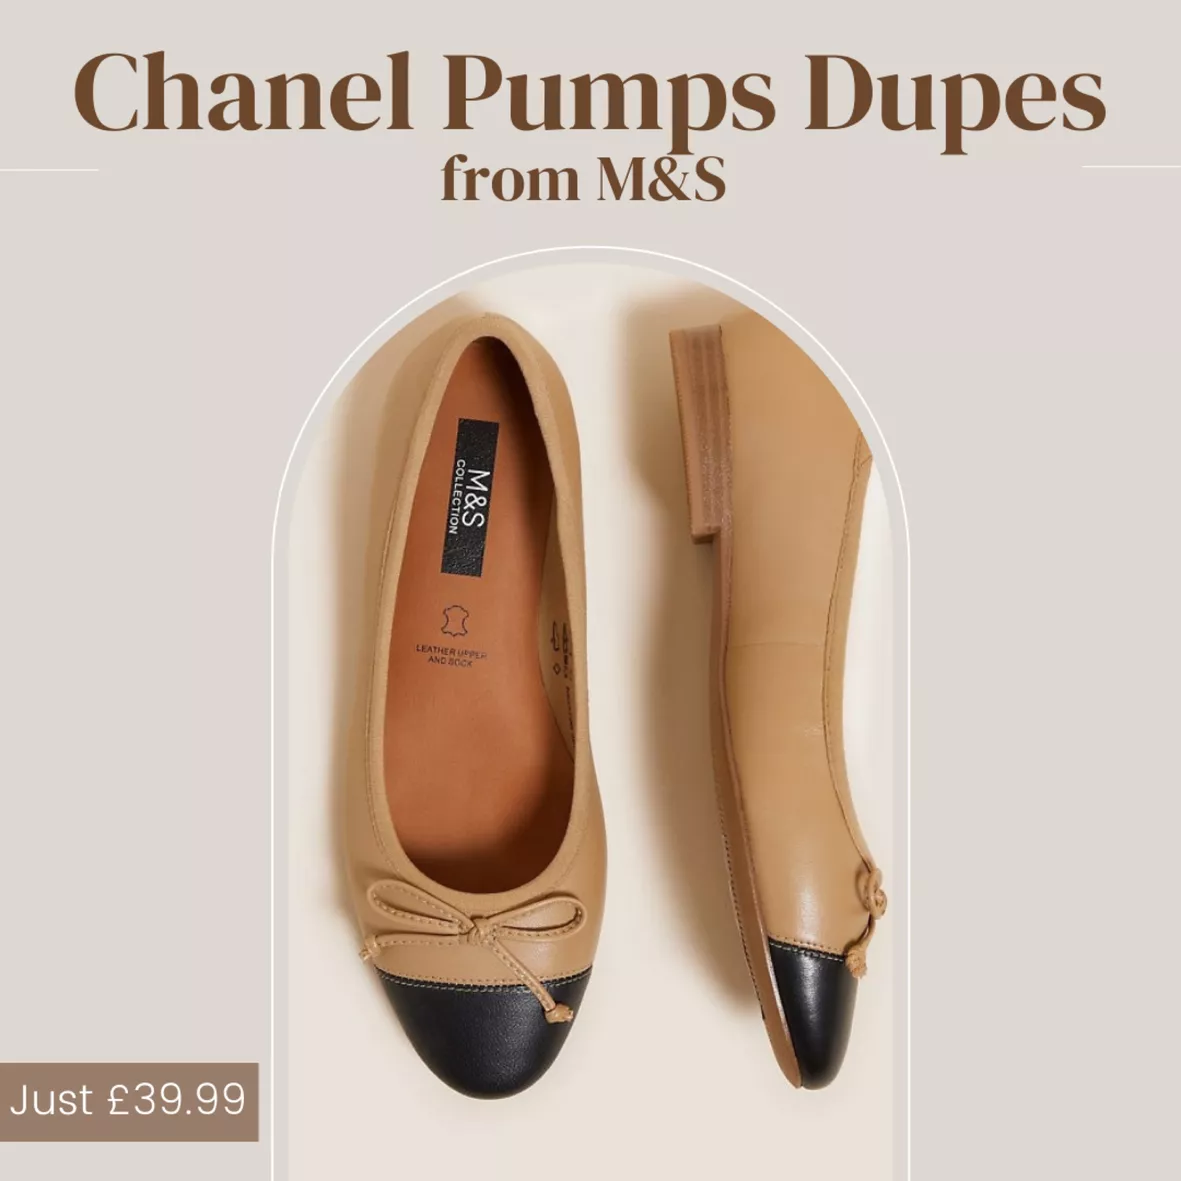 Chanel Ballet Flats Review: Are They Worth It? - Ballerina Gallery